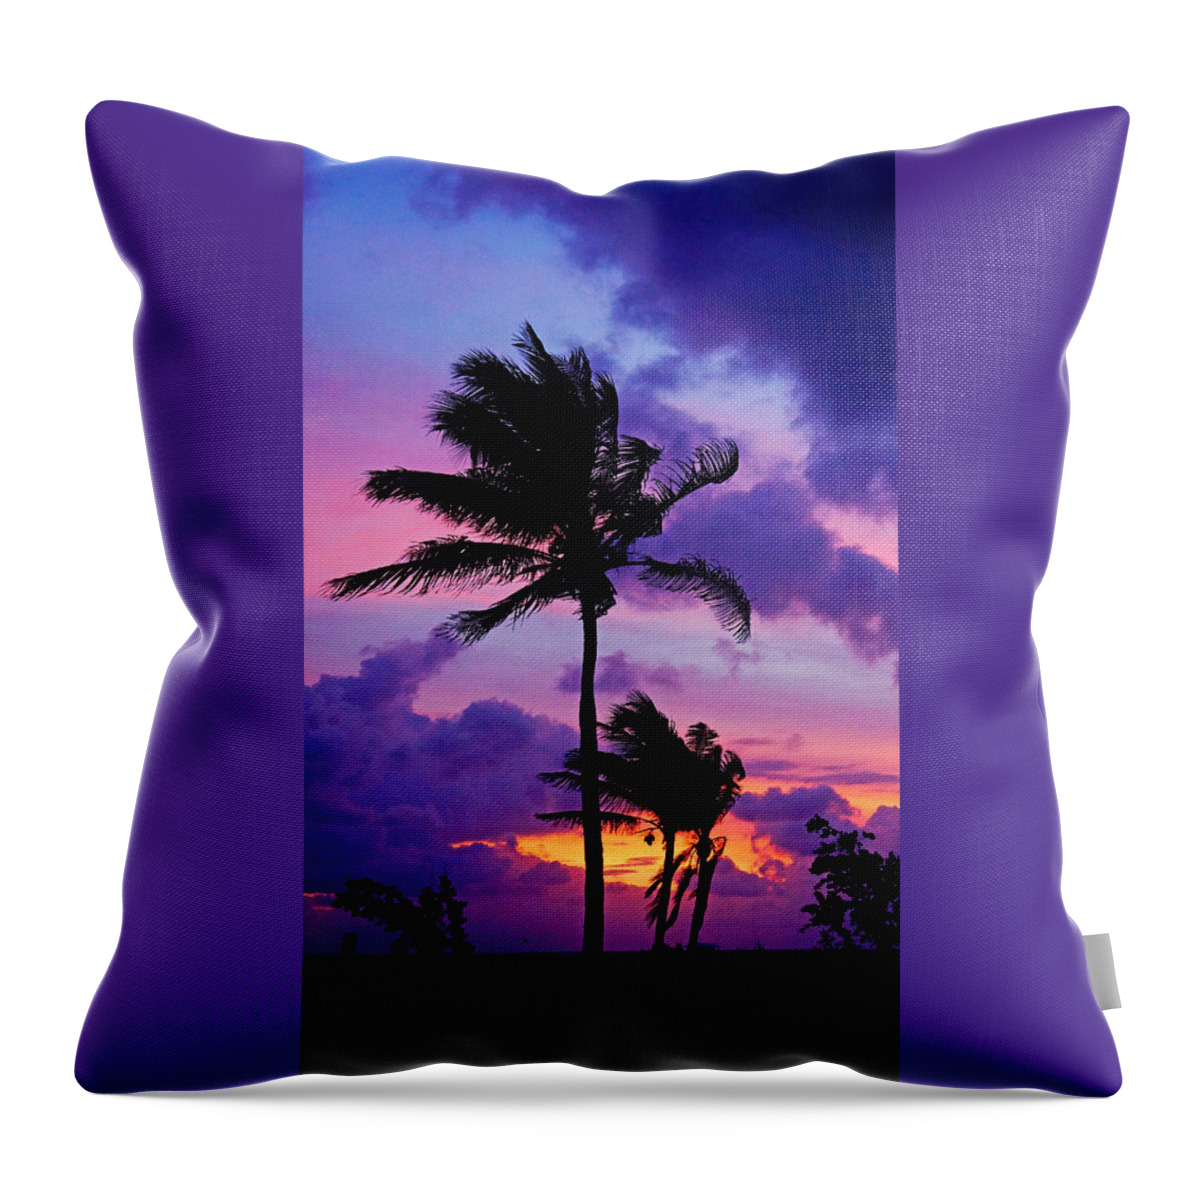 Purple Throw Pillow featuring the photograph Purple Palm Sunrise by Lawrence S Richardson Jr